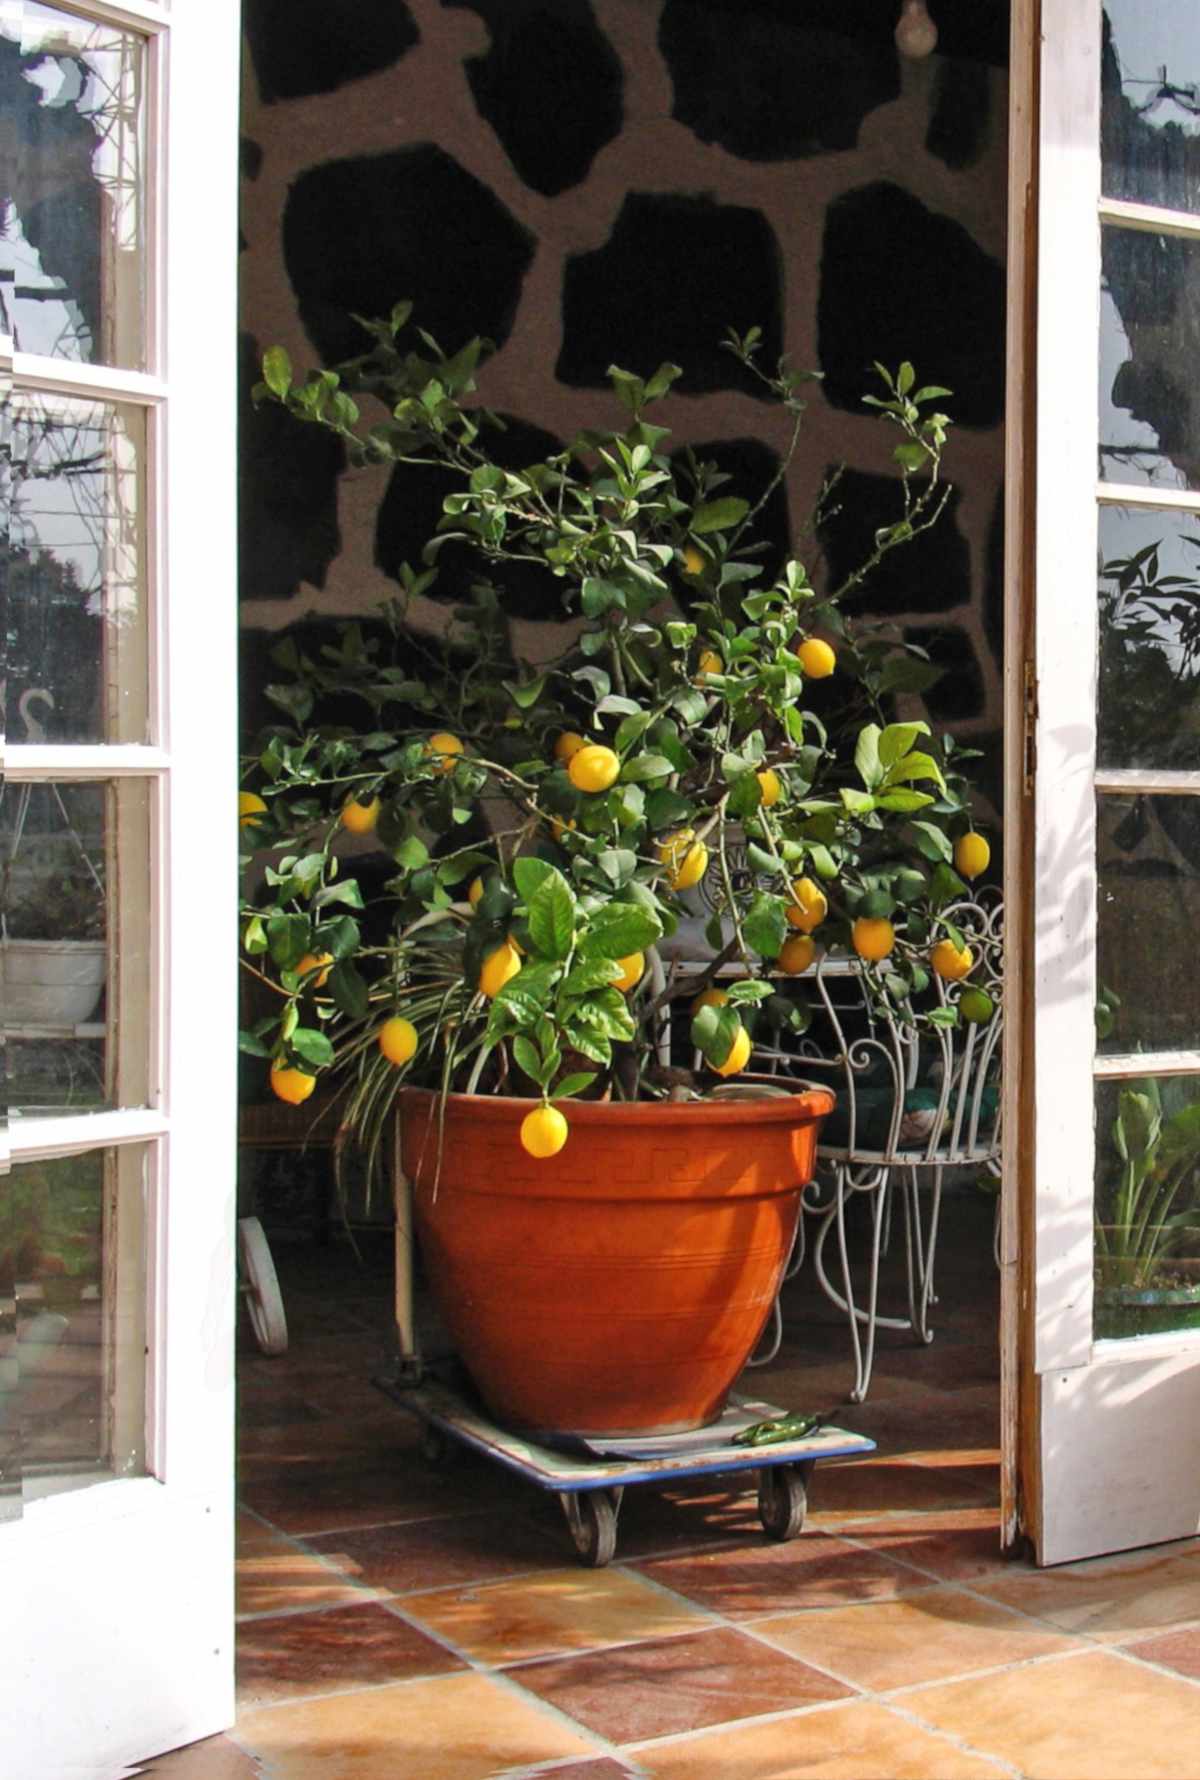 How to take care of citrus plants